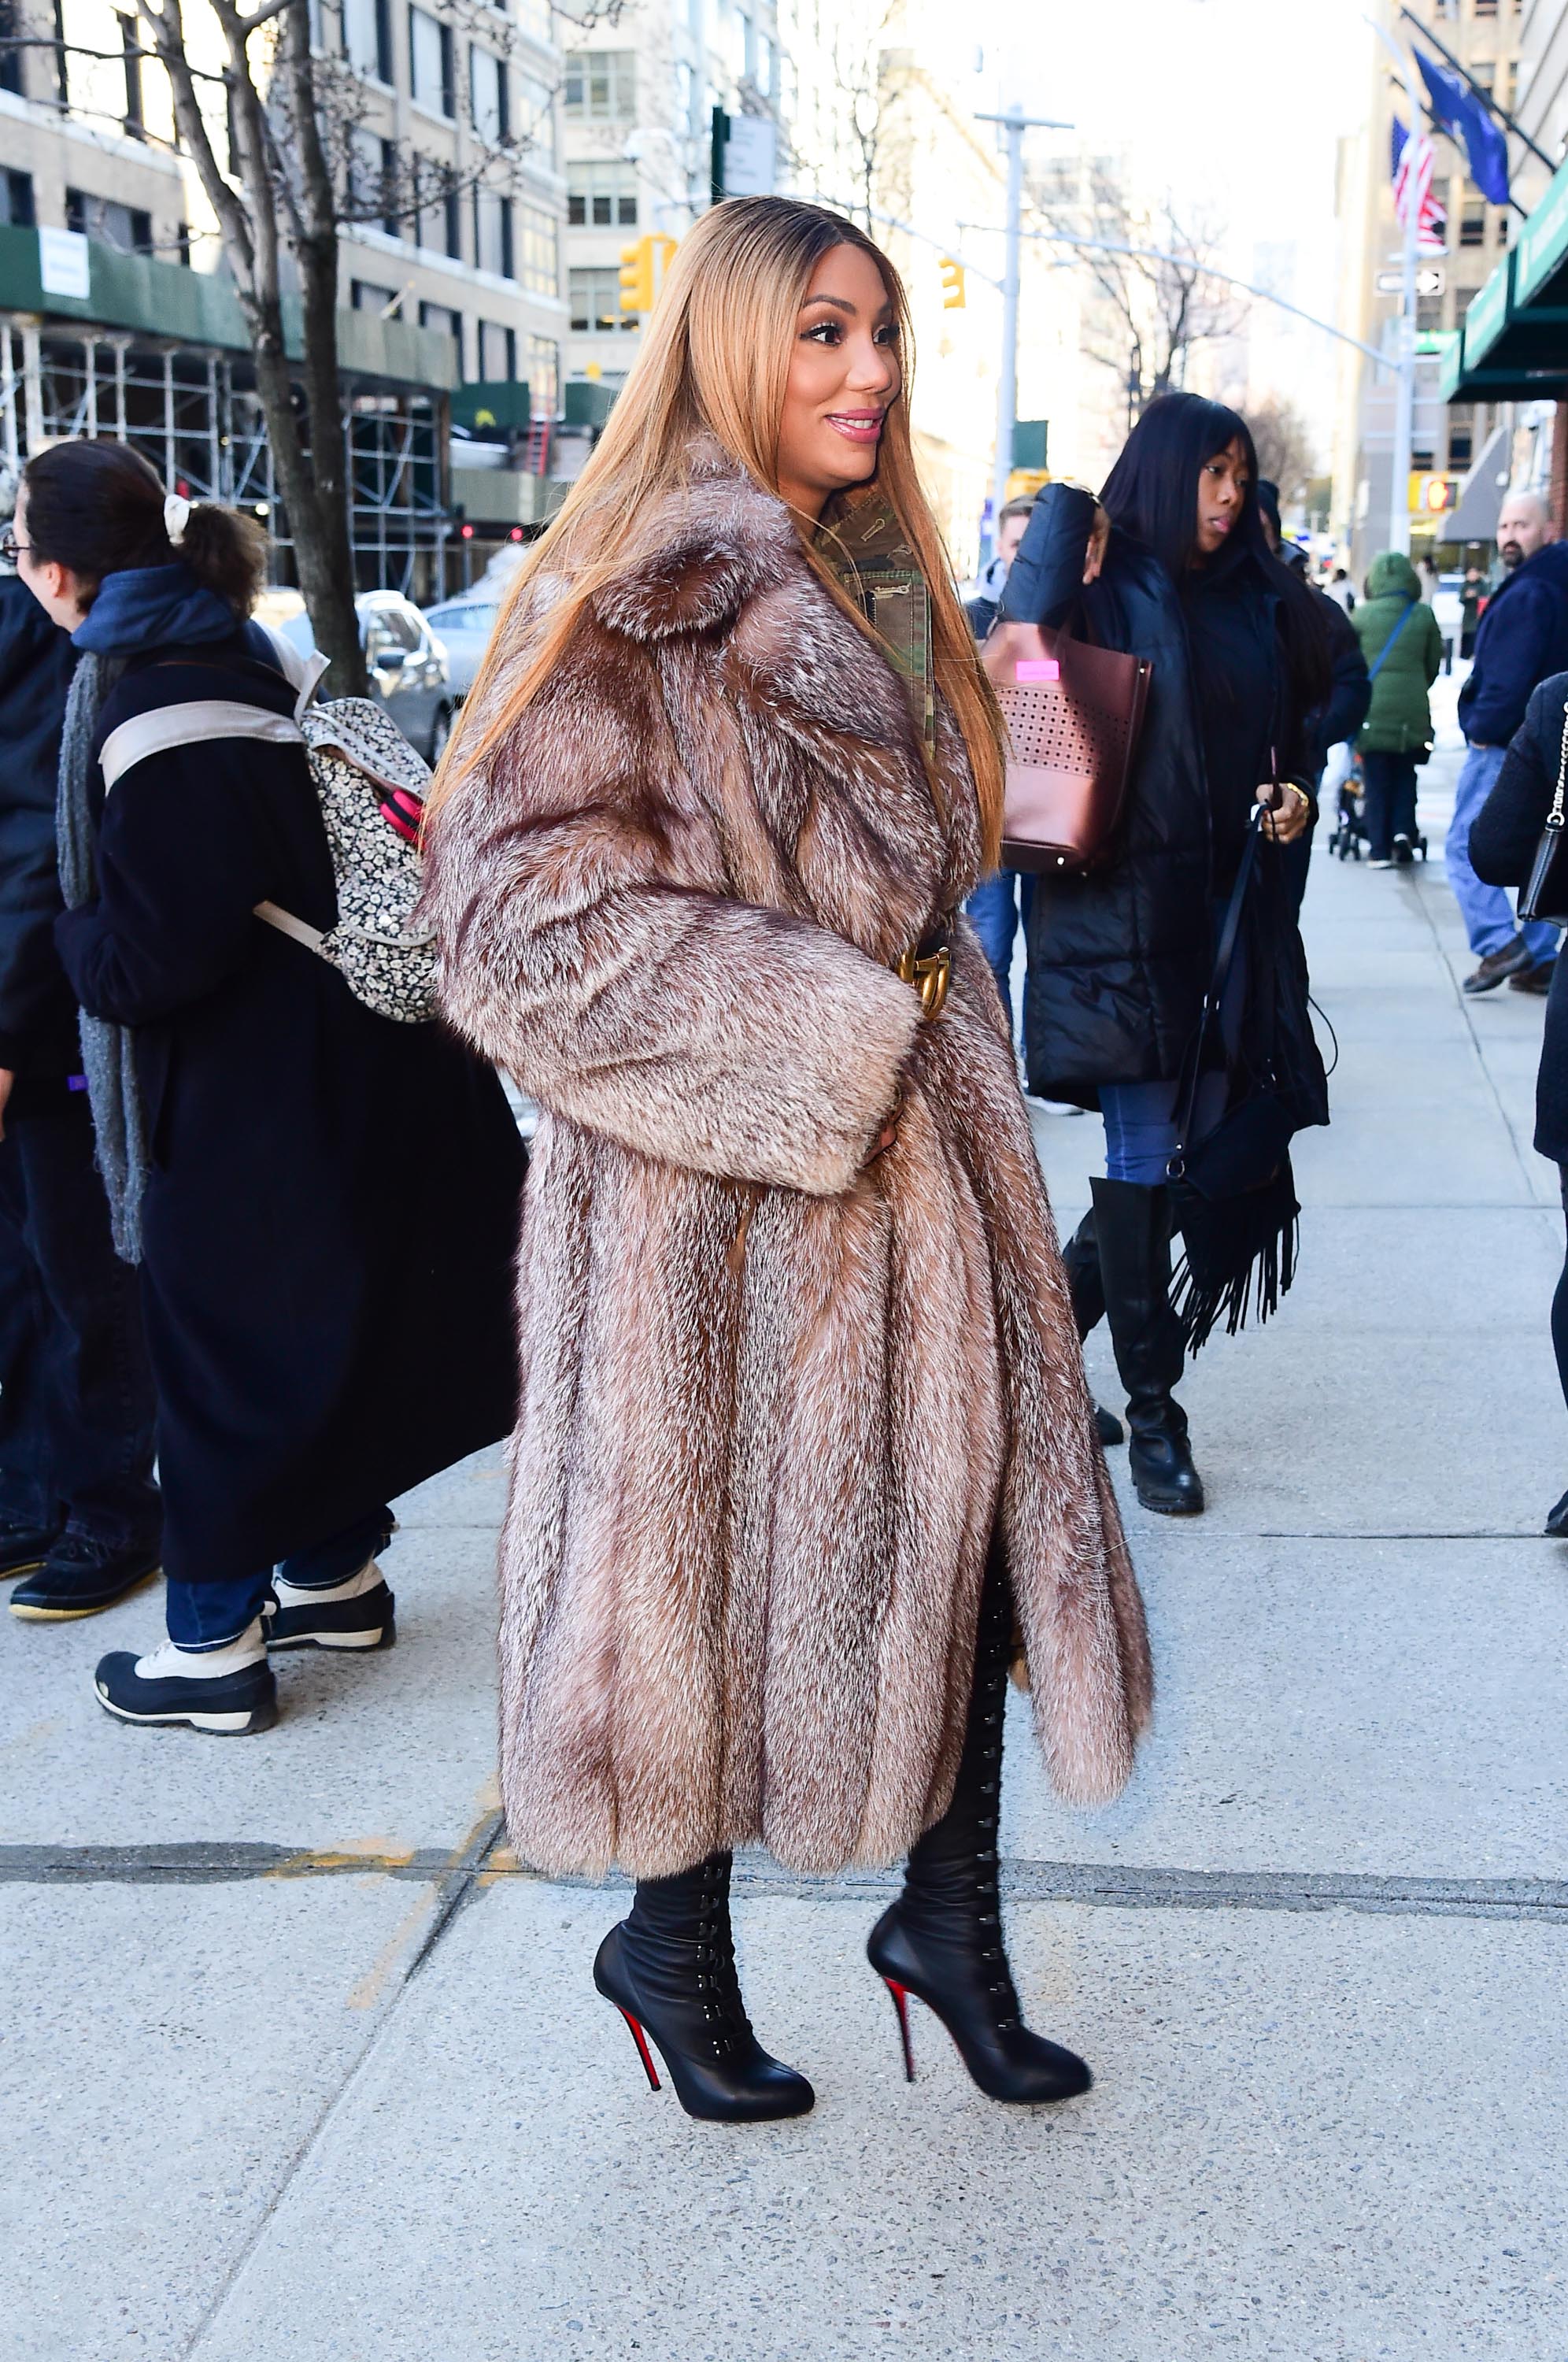 Tamar Braxton seen outside out Hot97